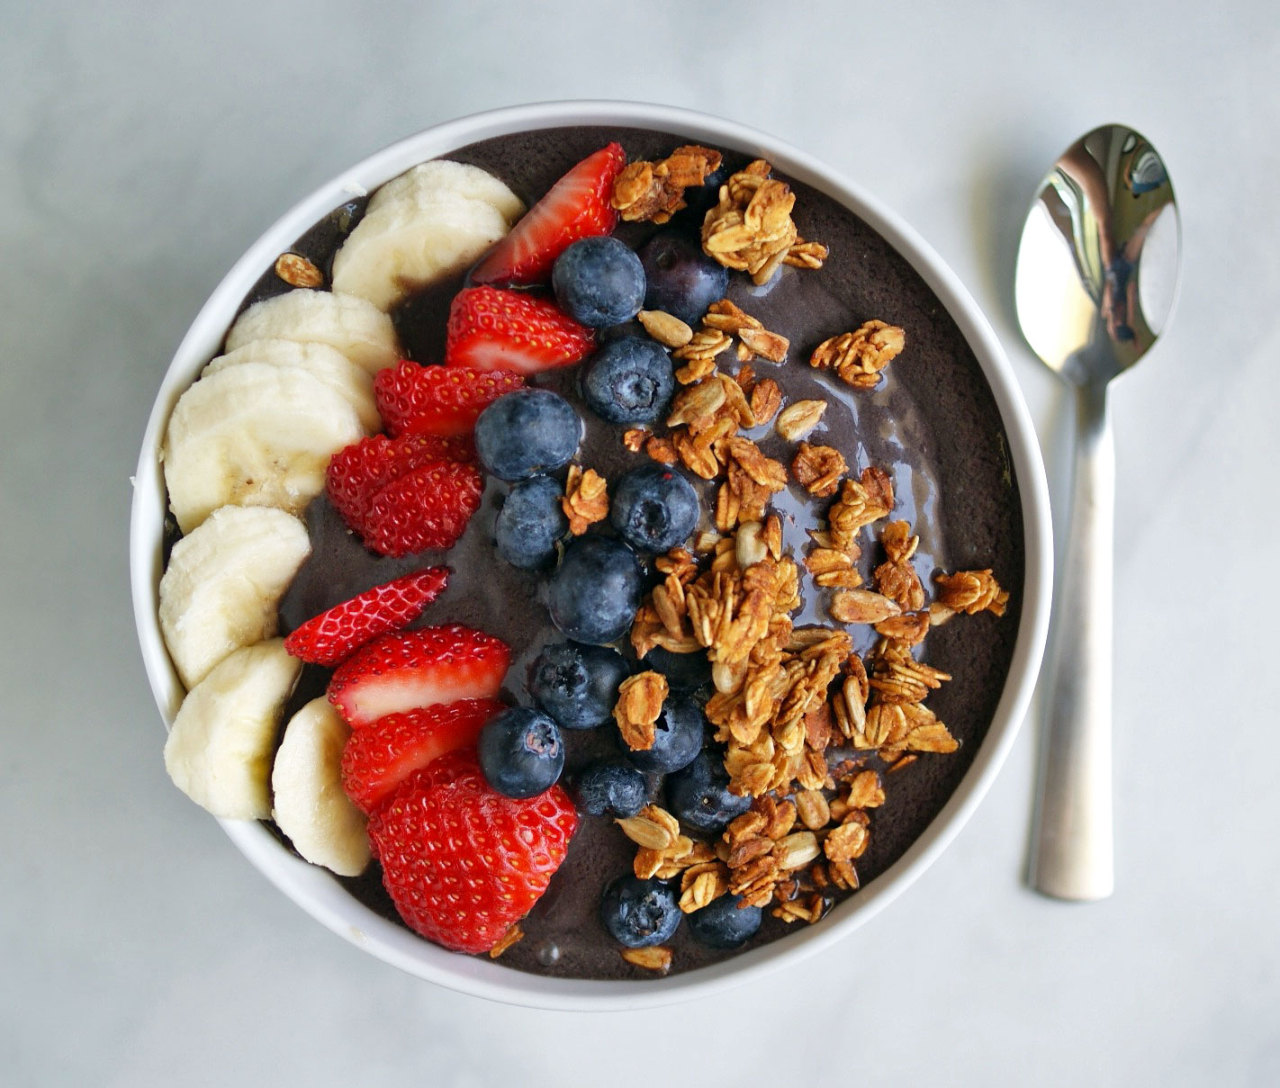 happyvibes-healthylives:
“Acai Bowl
”